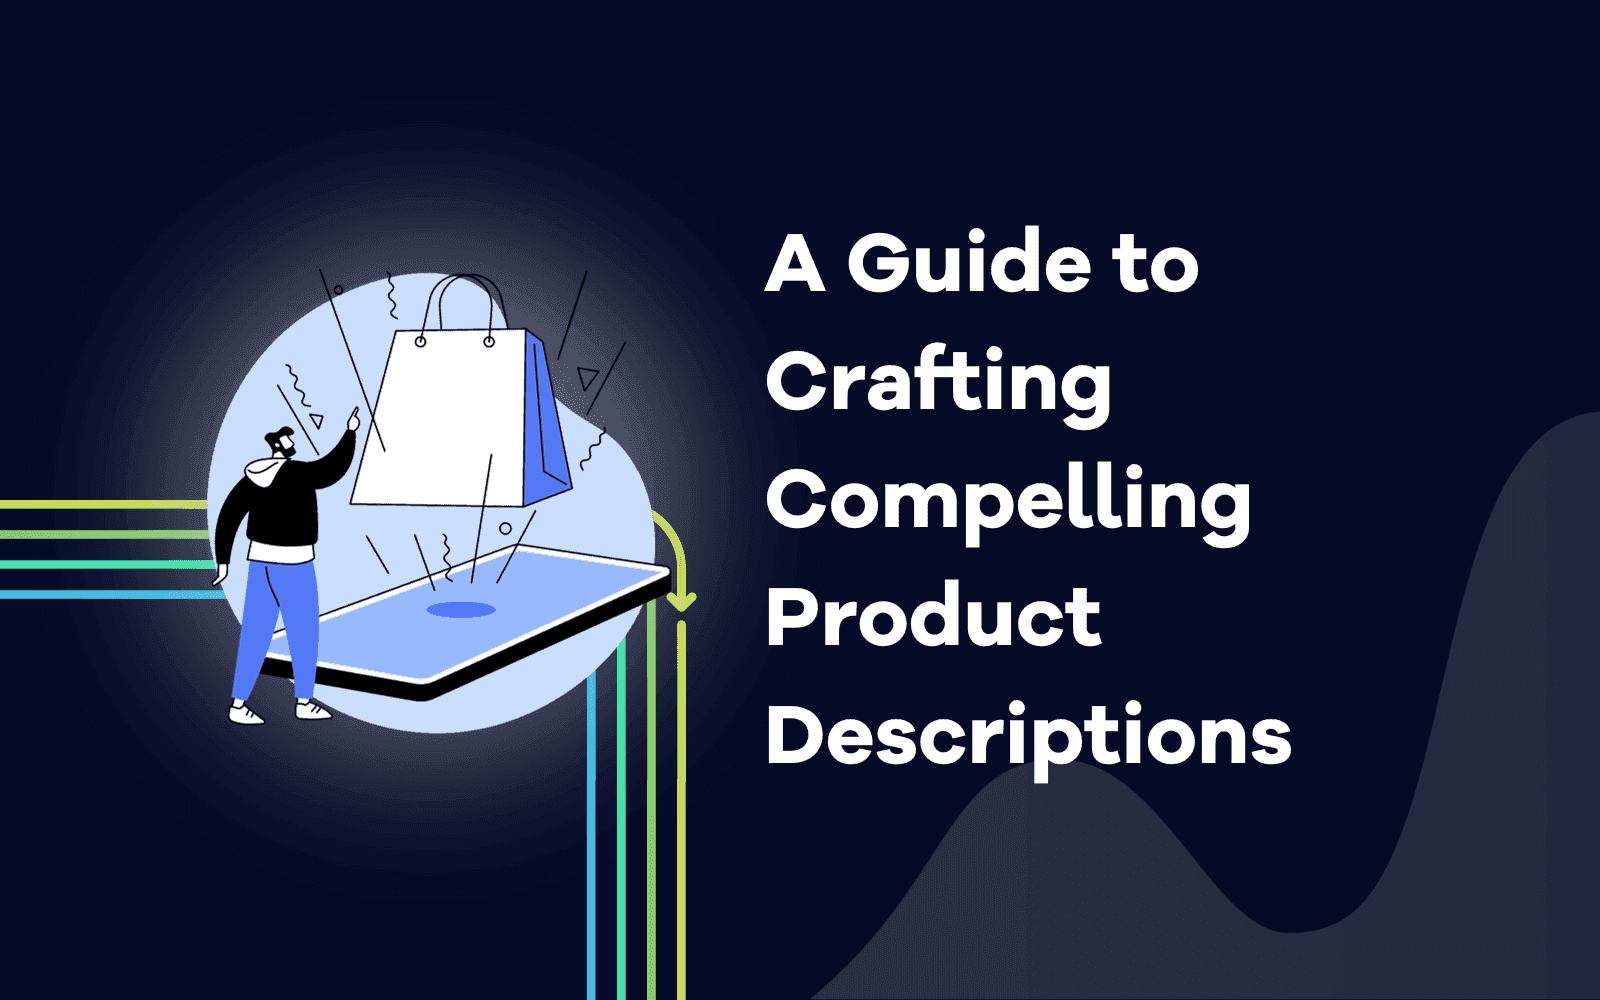 Guide to Crafting Compelling Product Descriptions